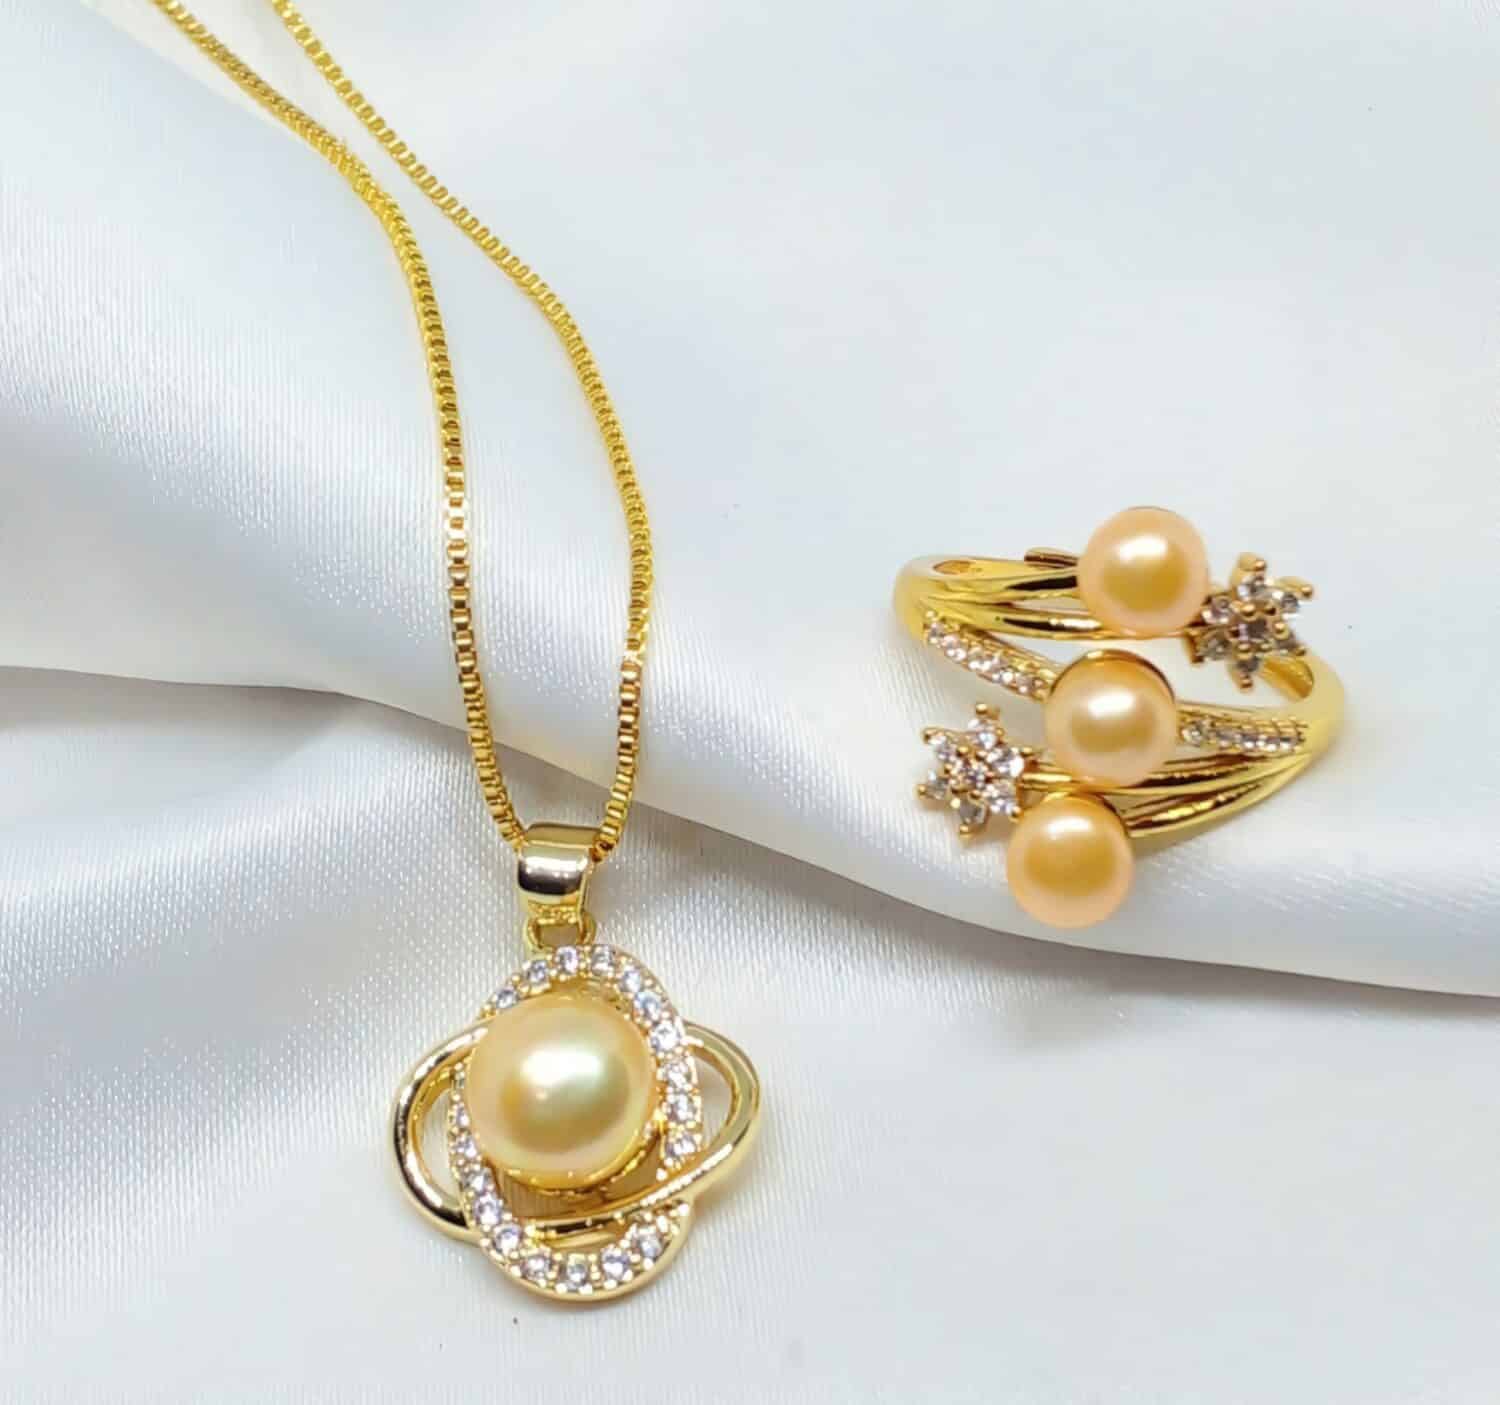 Beauty flowing in every pearl, this golden pearl ring and necklace symbolizes luxury and elegance beyond compare.